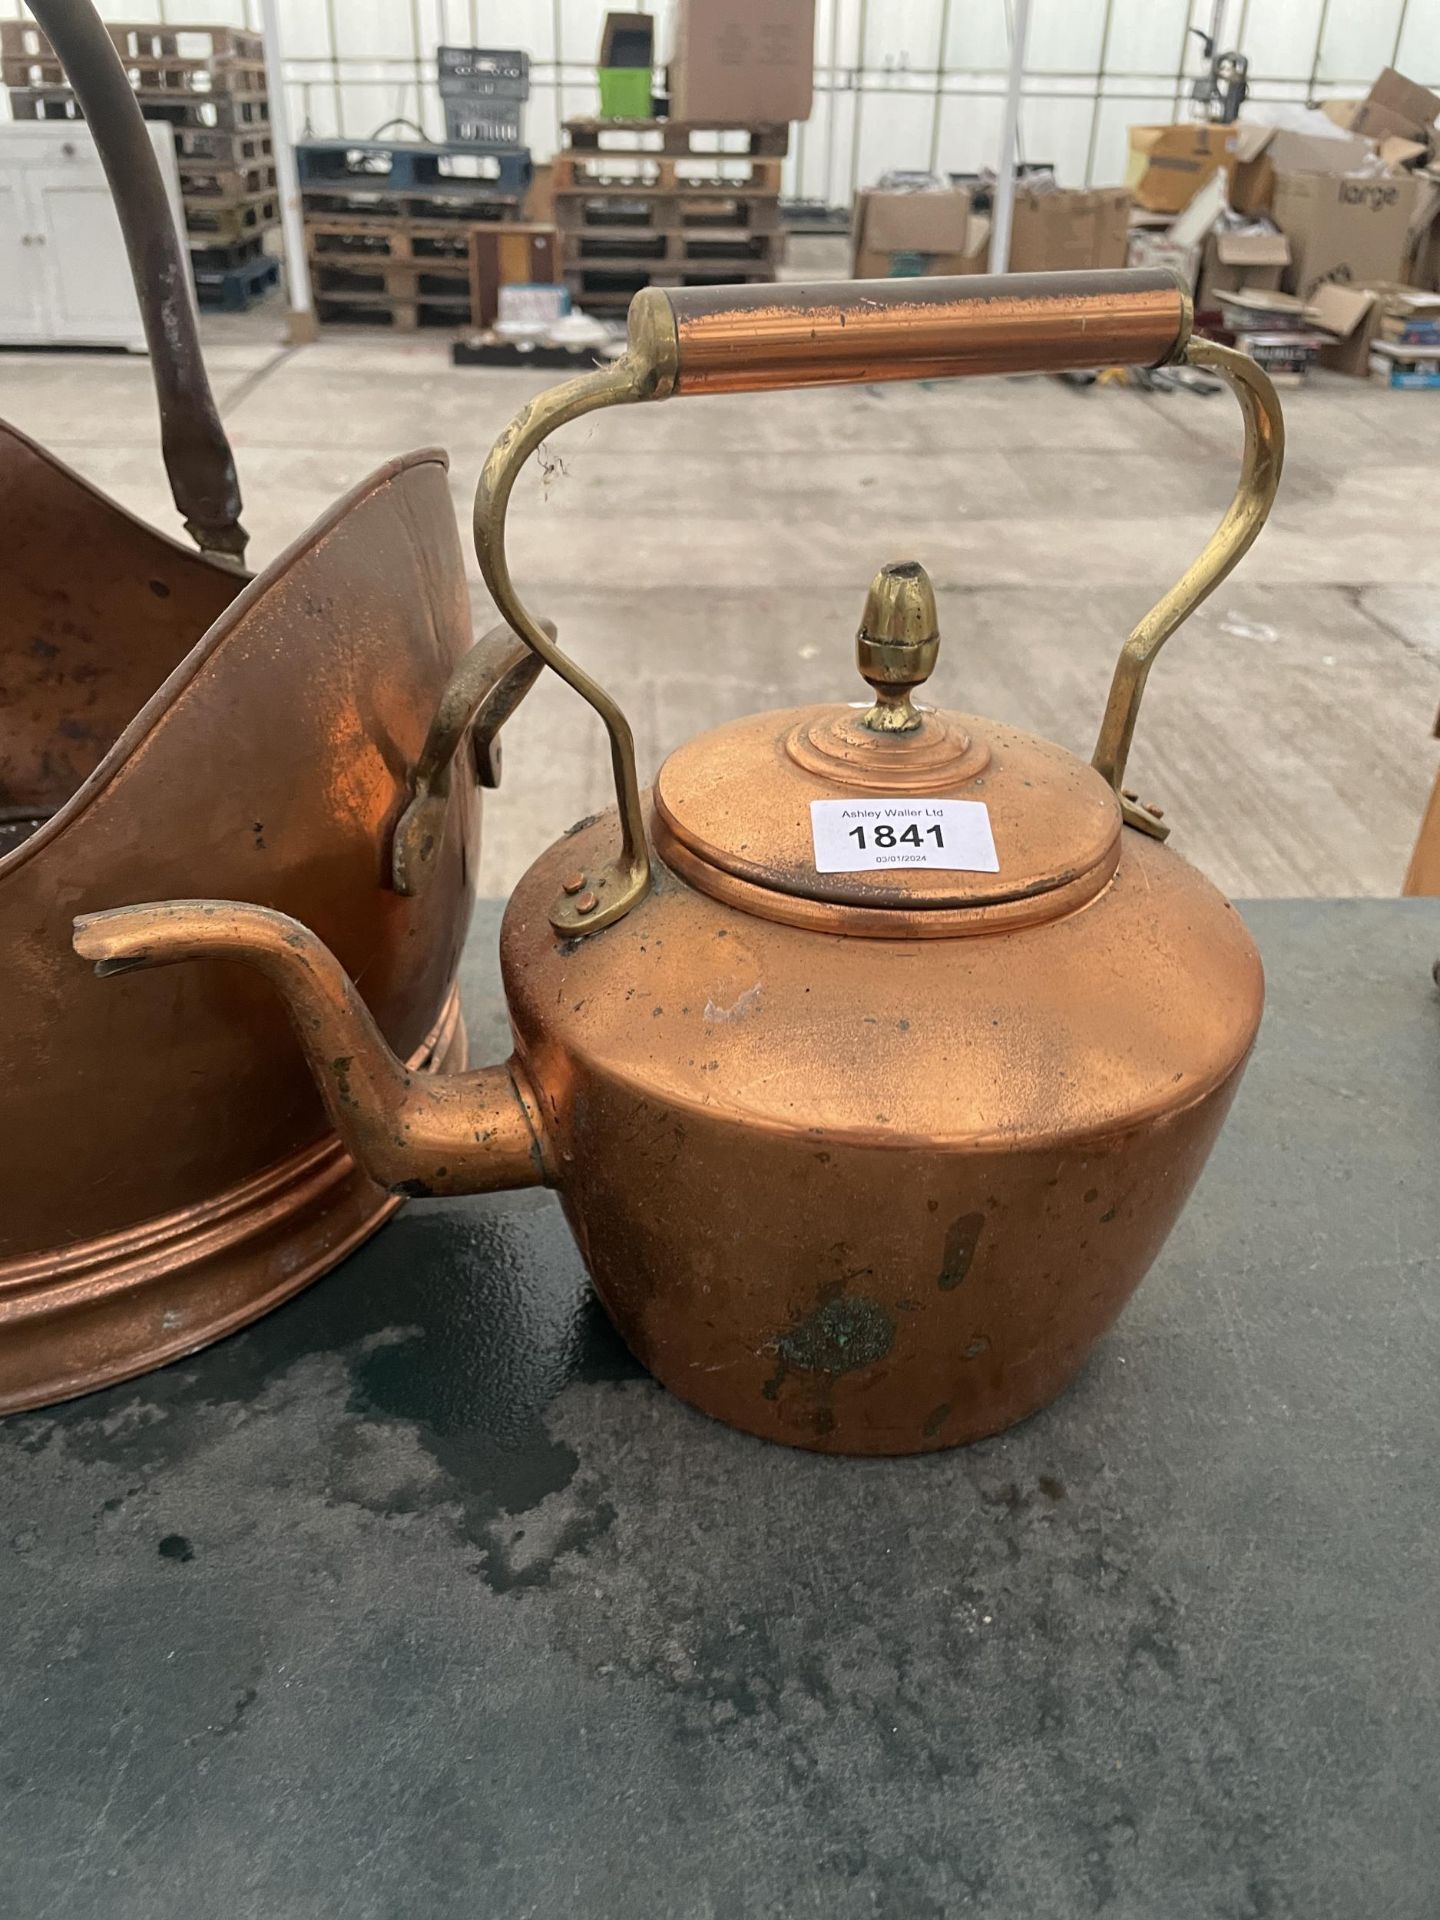 A VINTAGE COPPER COAL BUCKET AND A VINTAGE COPPER KETTLE - Image 2 of 3